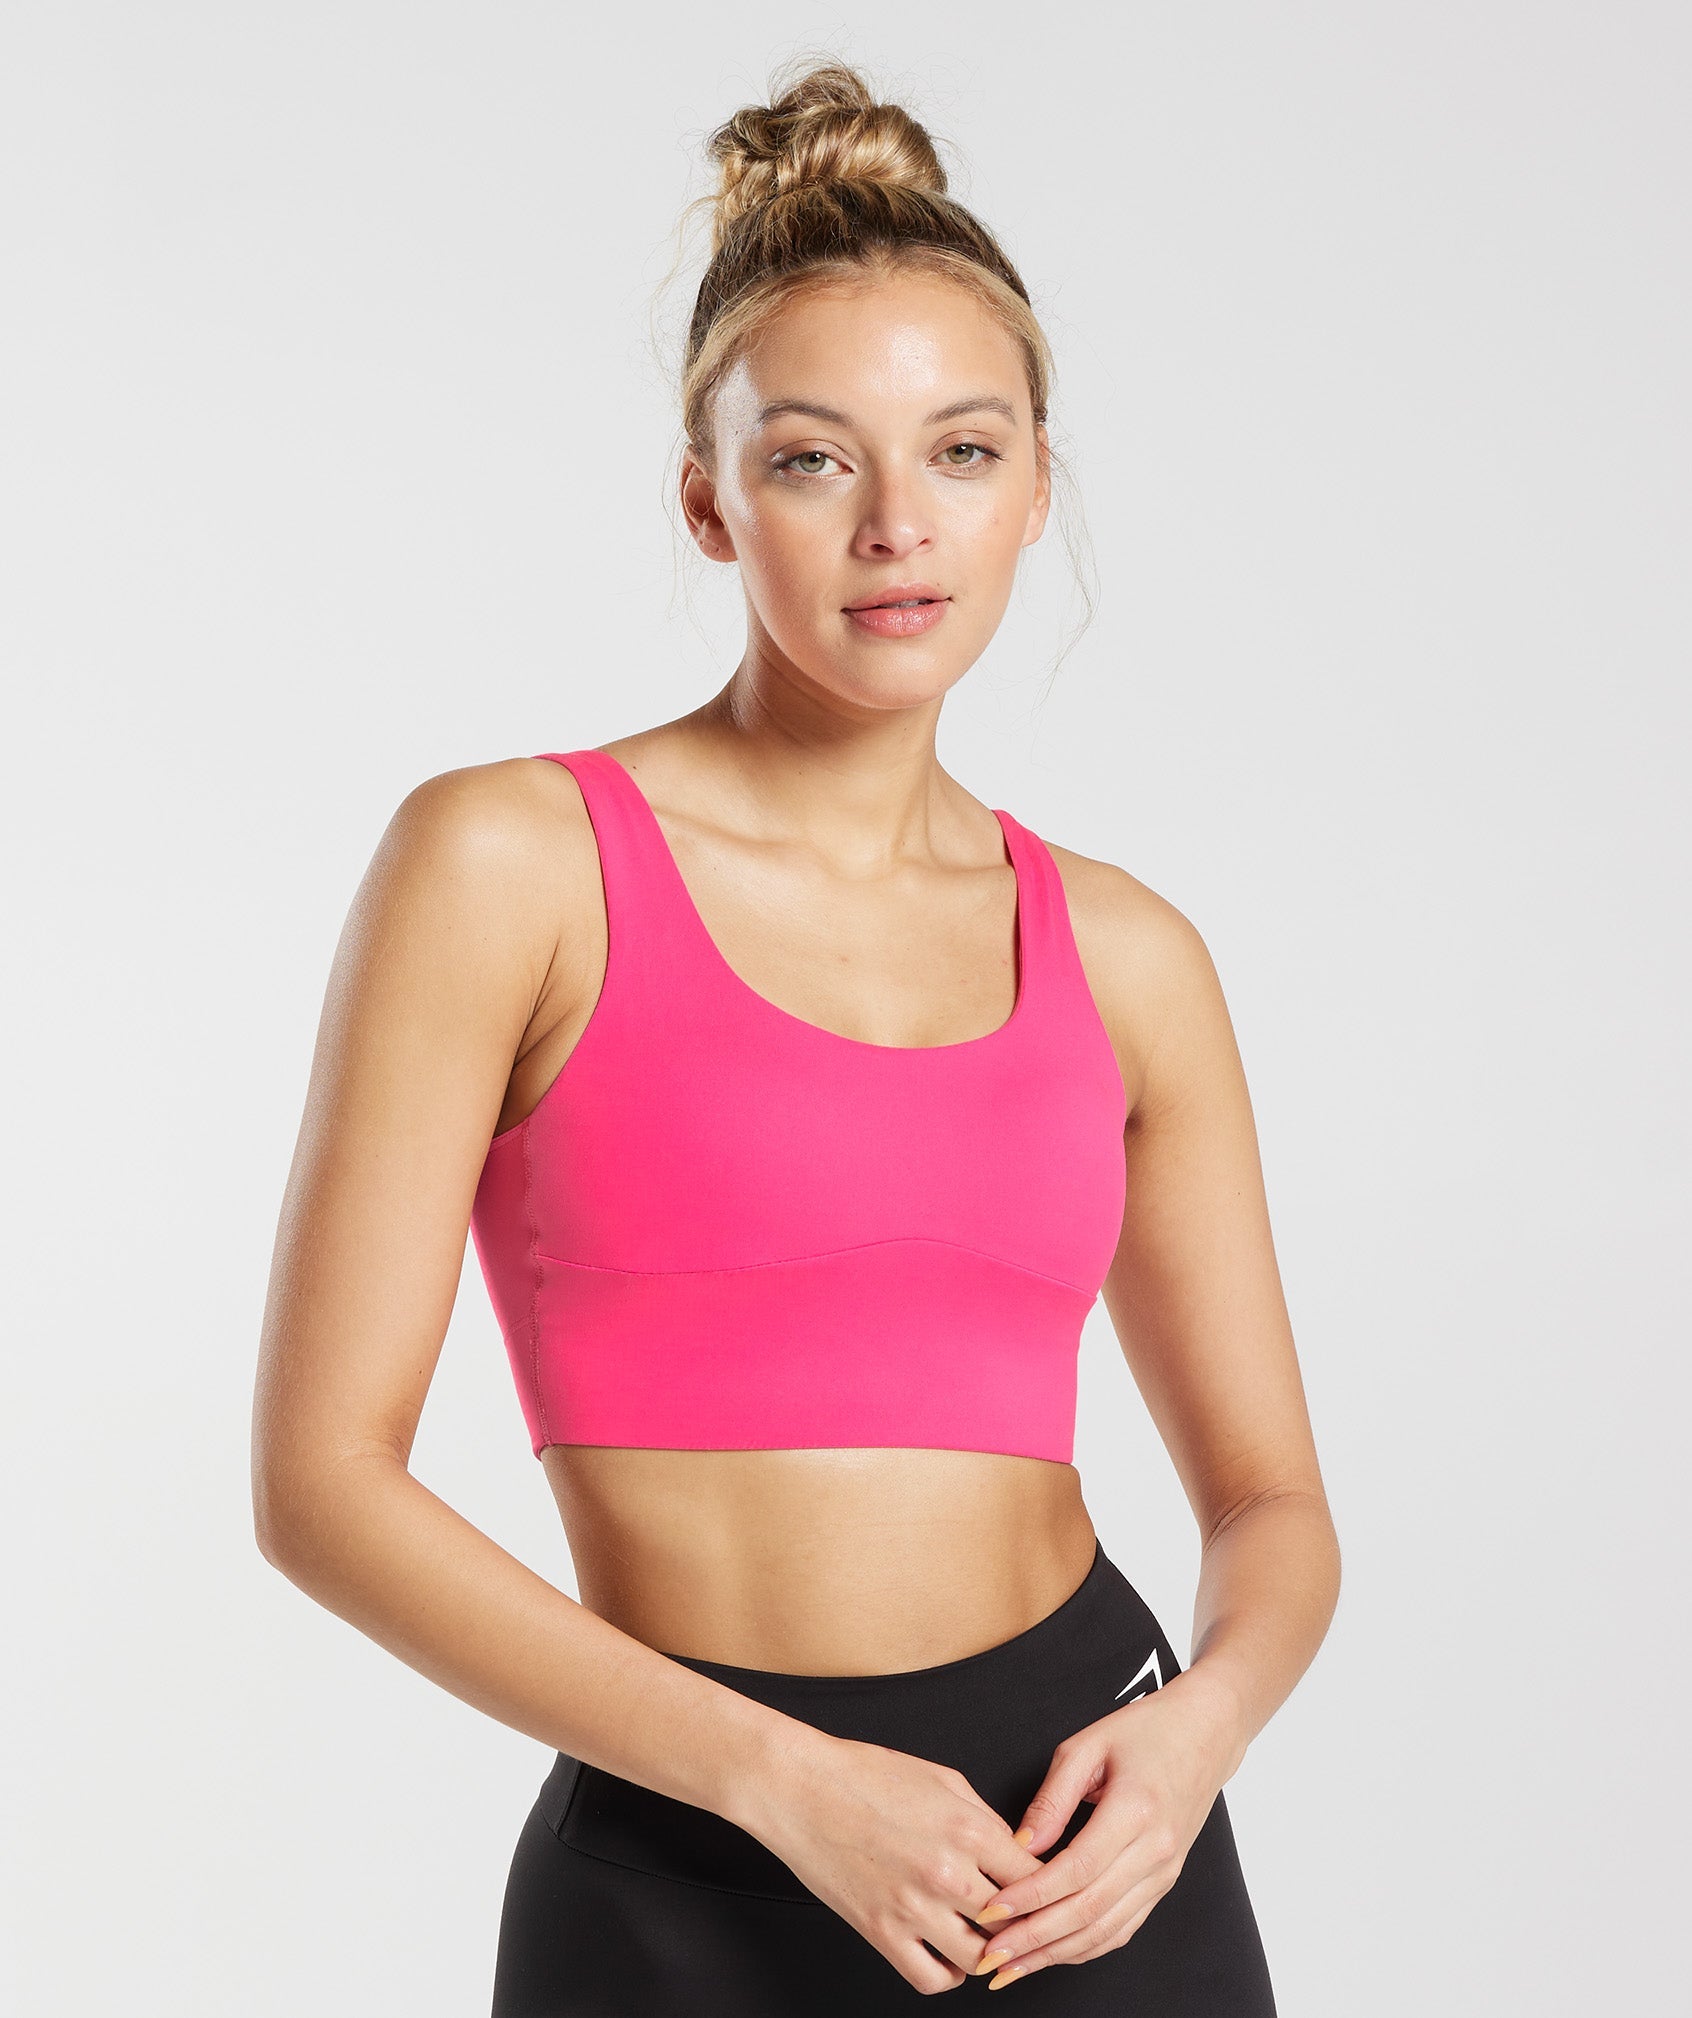 Gymshark - We're rockin' the pink today 'cause that is SO fetch